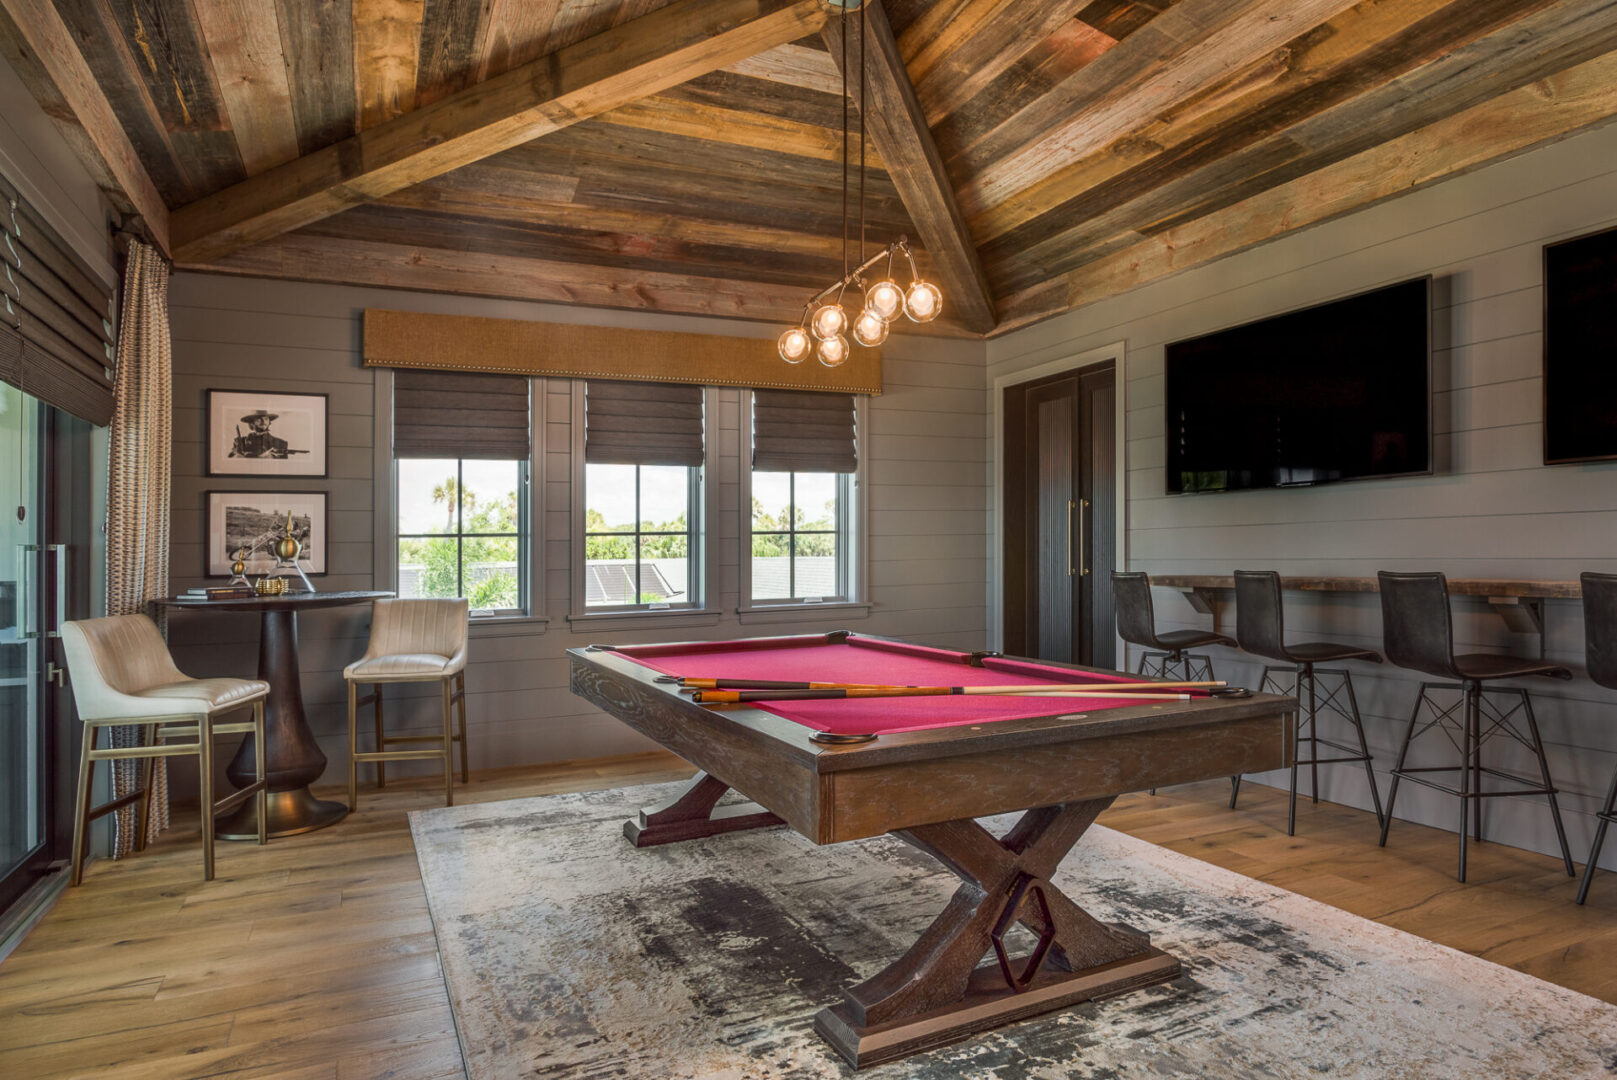 A Billiards Area With High Wooden Beams